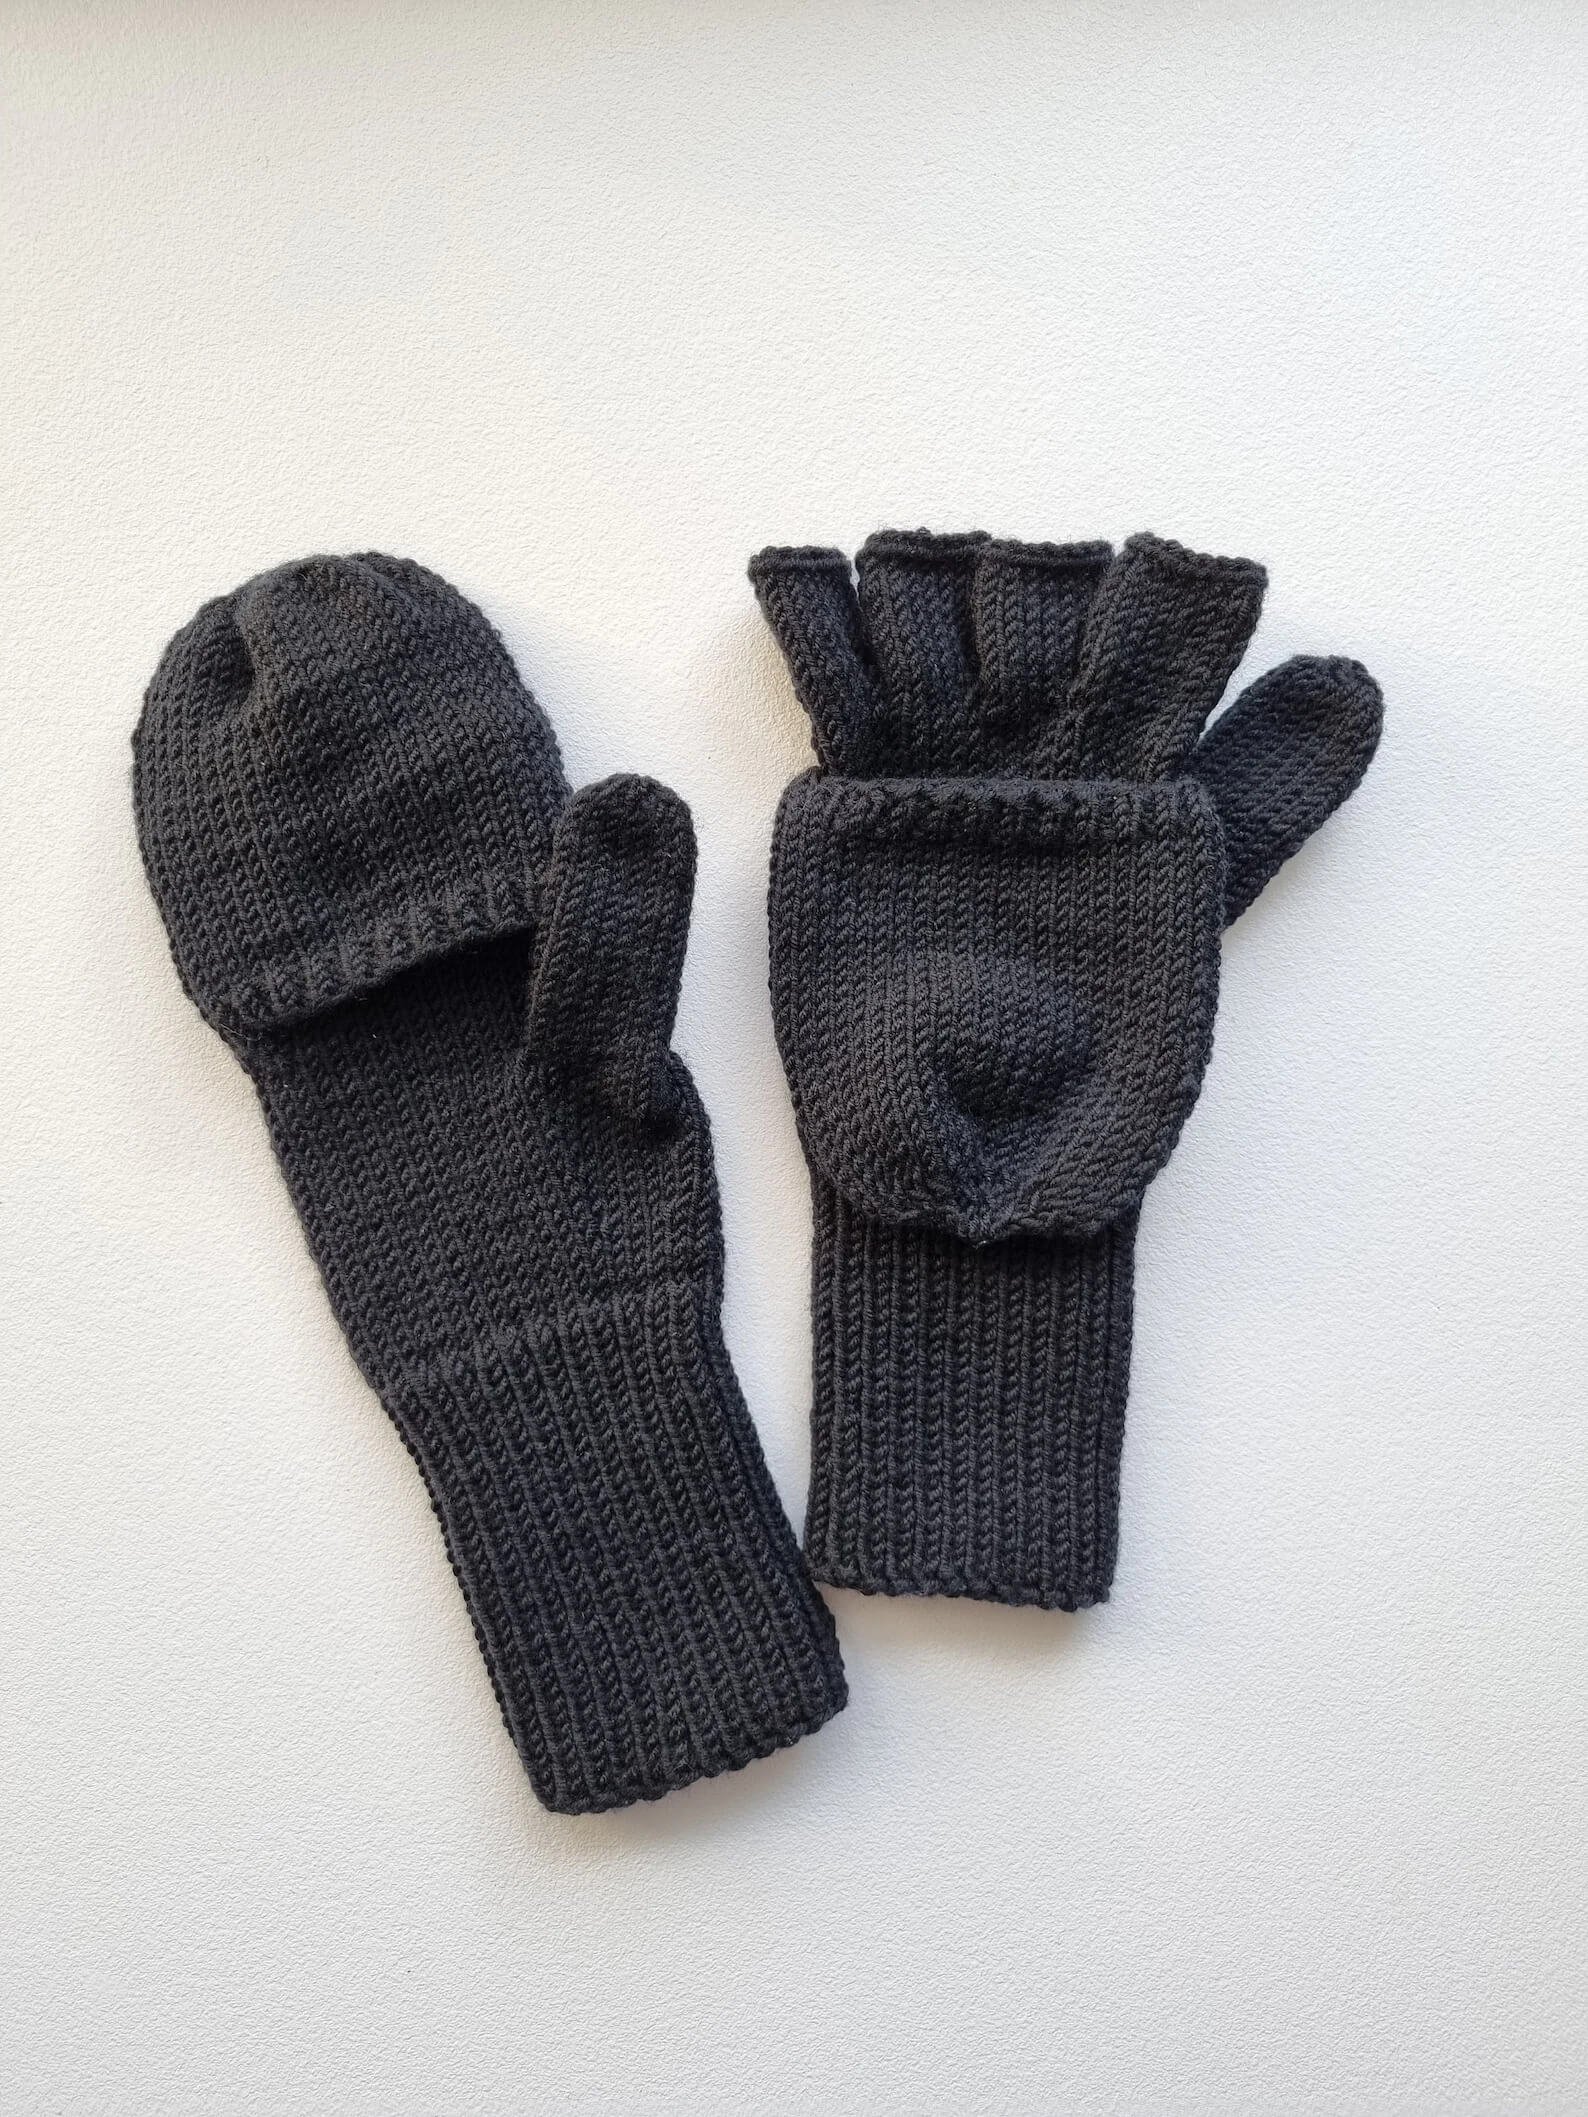 knitted woolen typing gloves